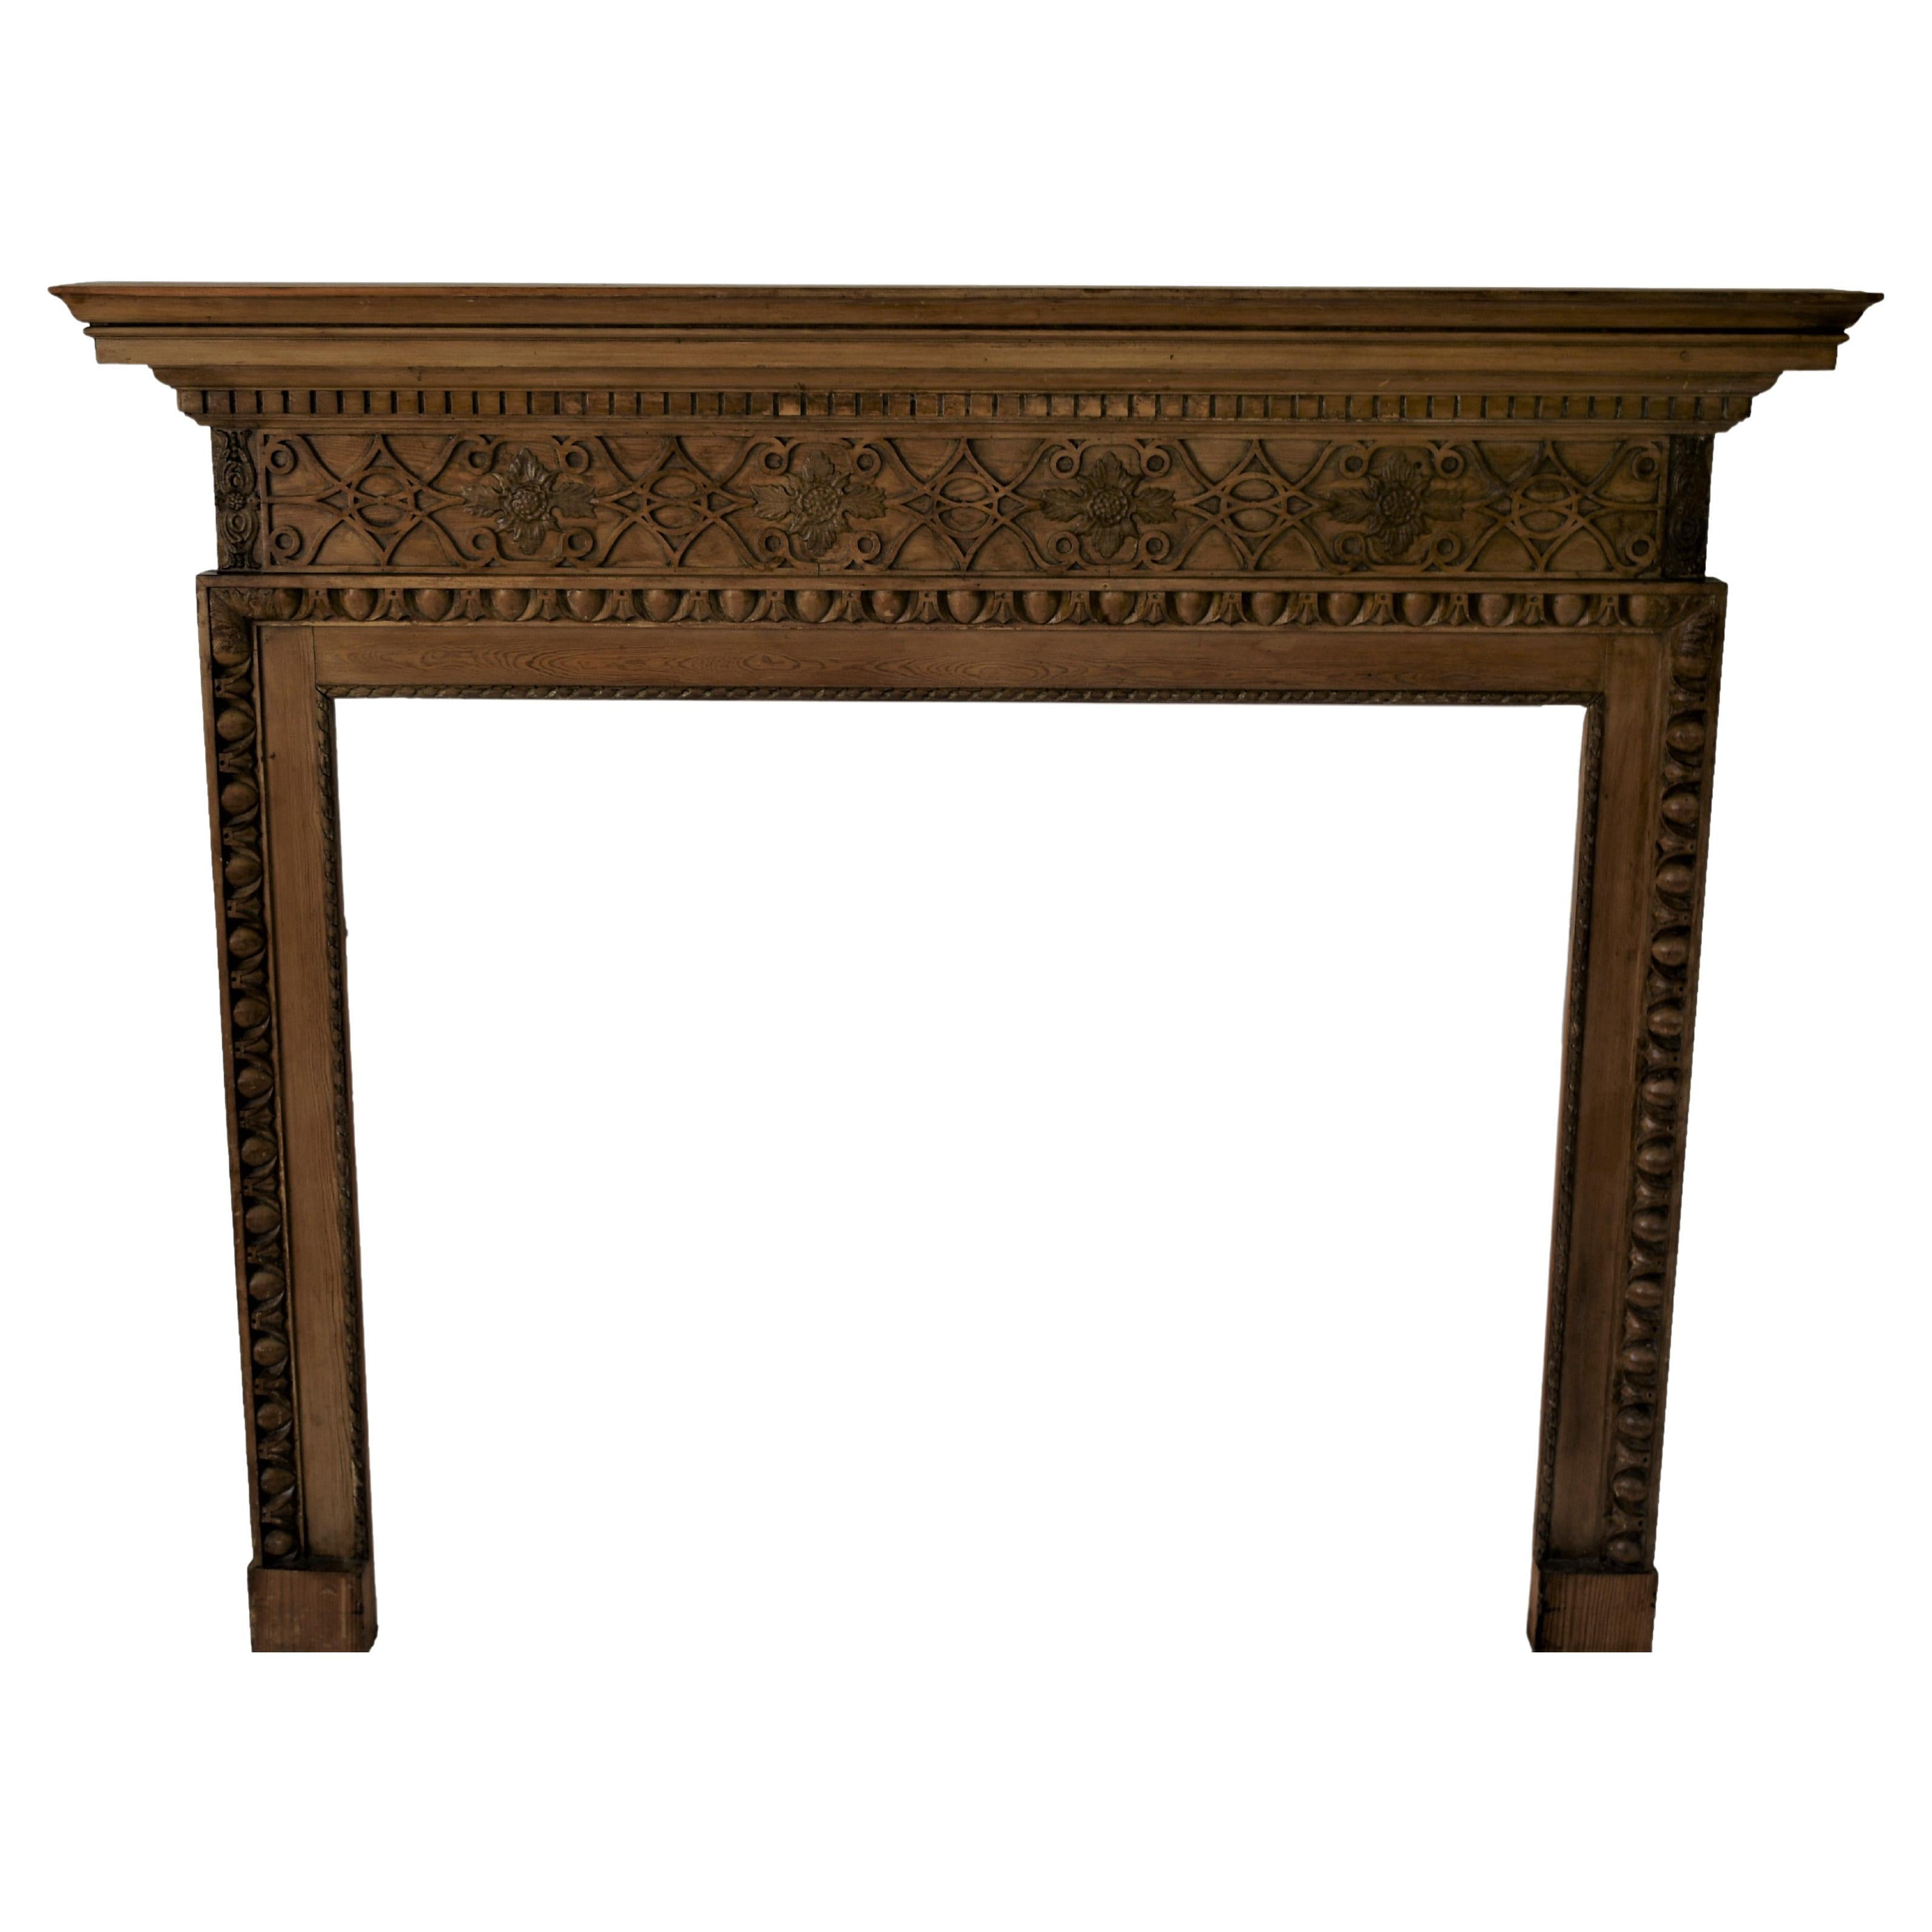 Vintage English Made Hand Carved Pine Fire Surround Mantel For Sale